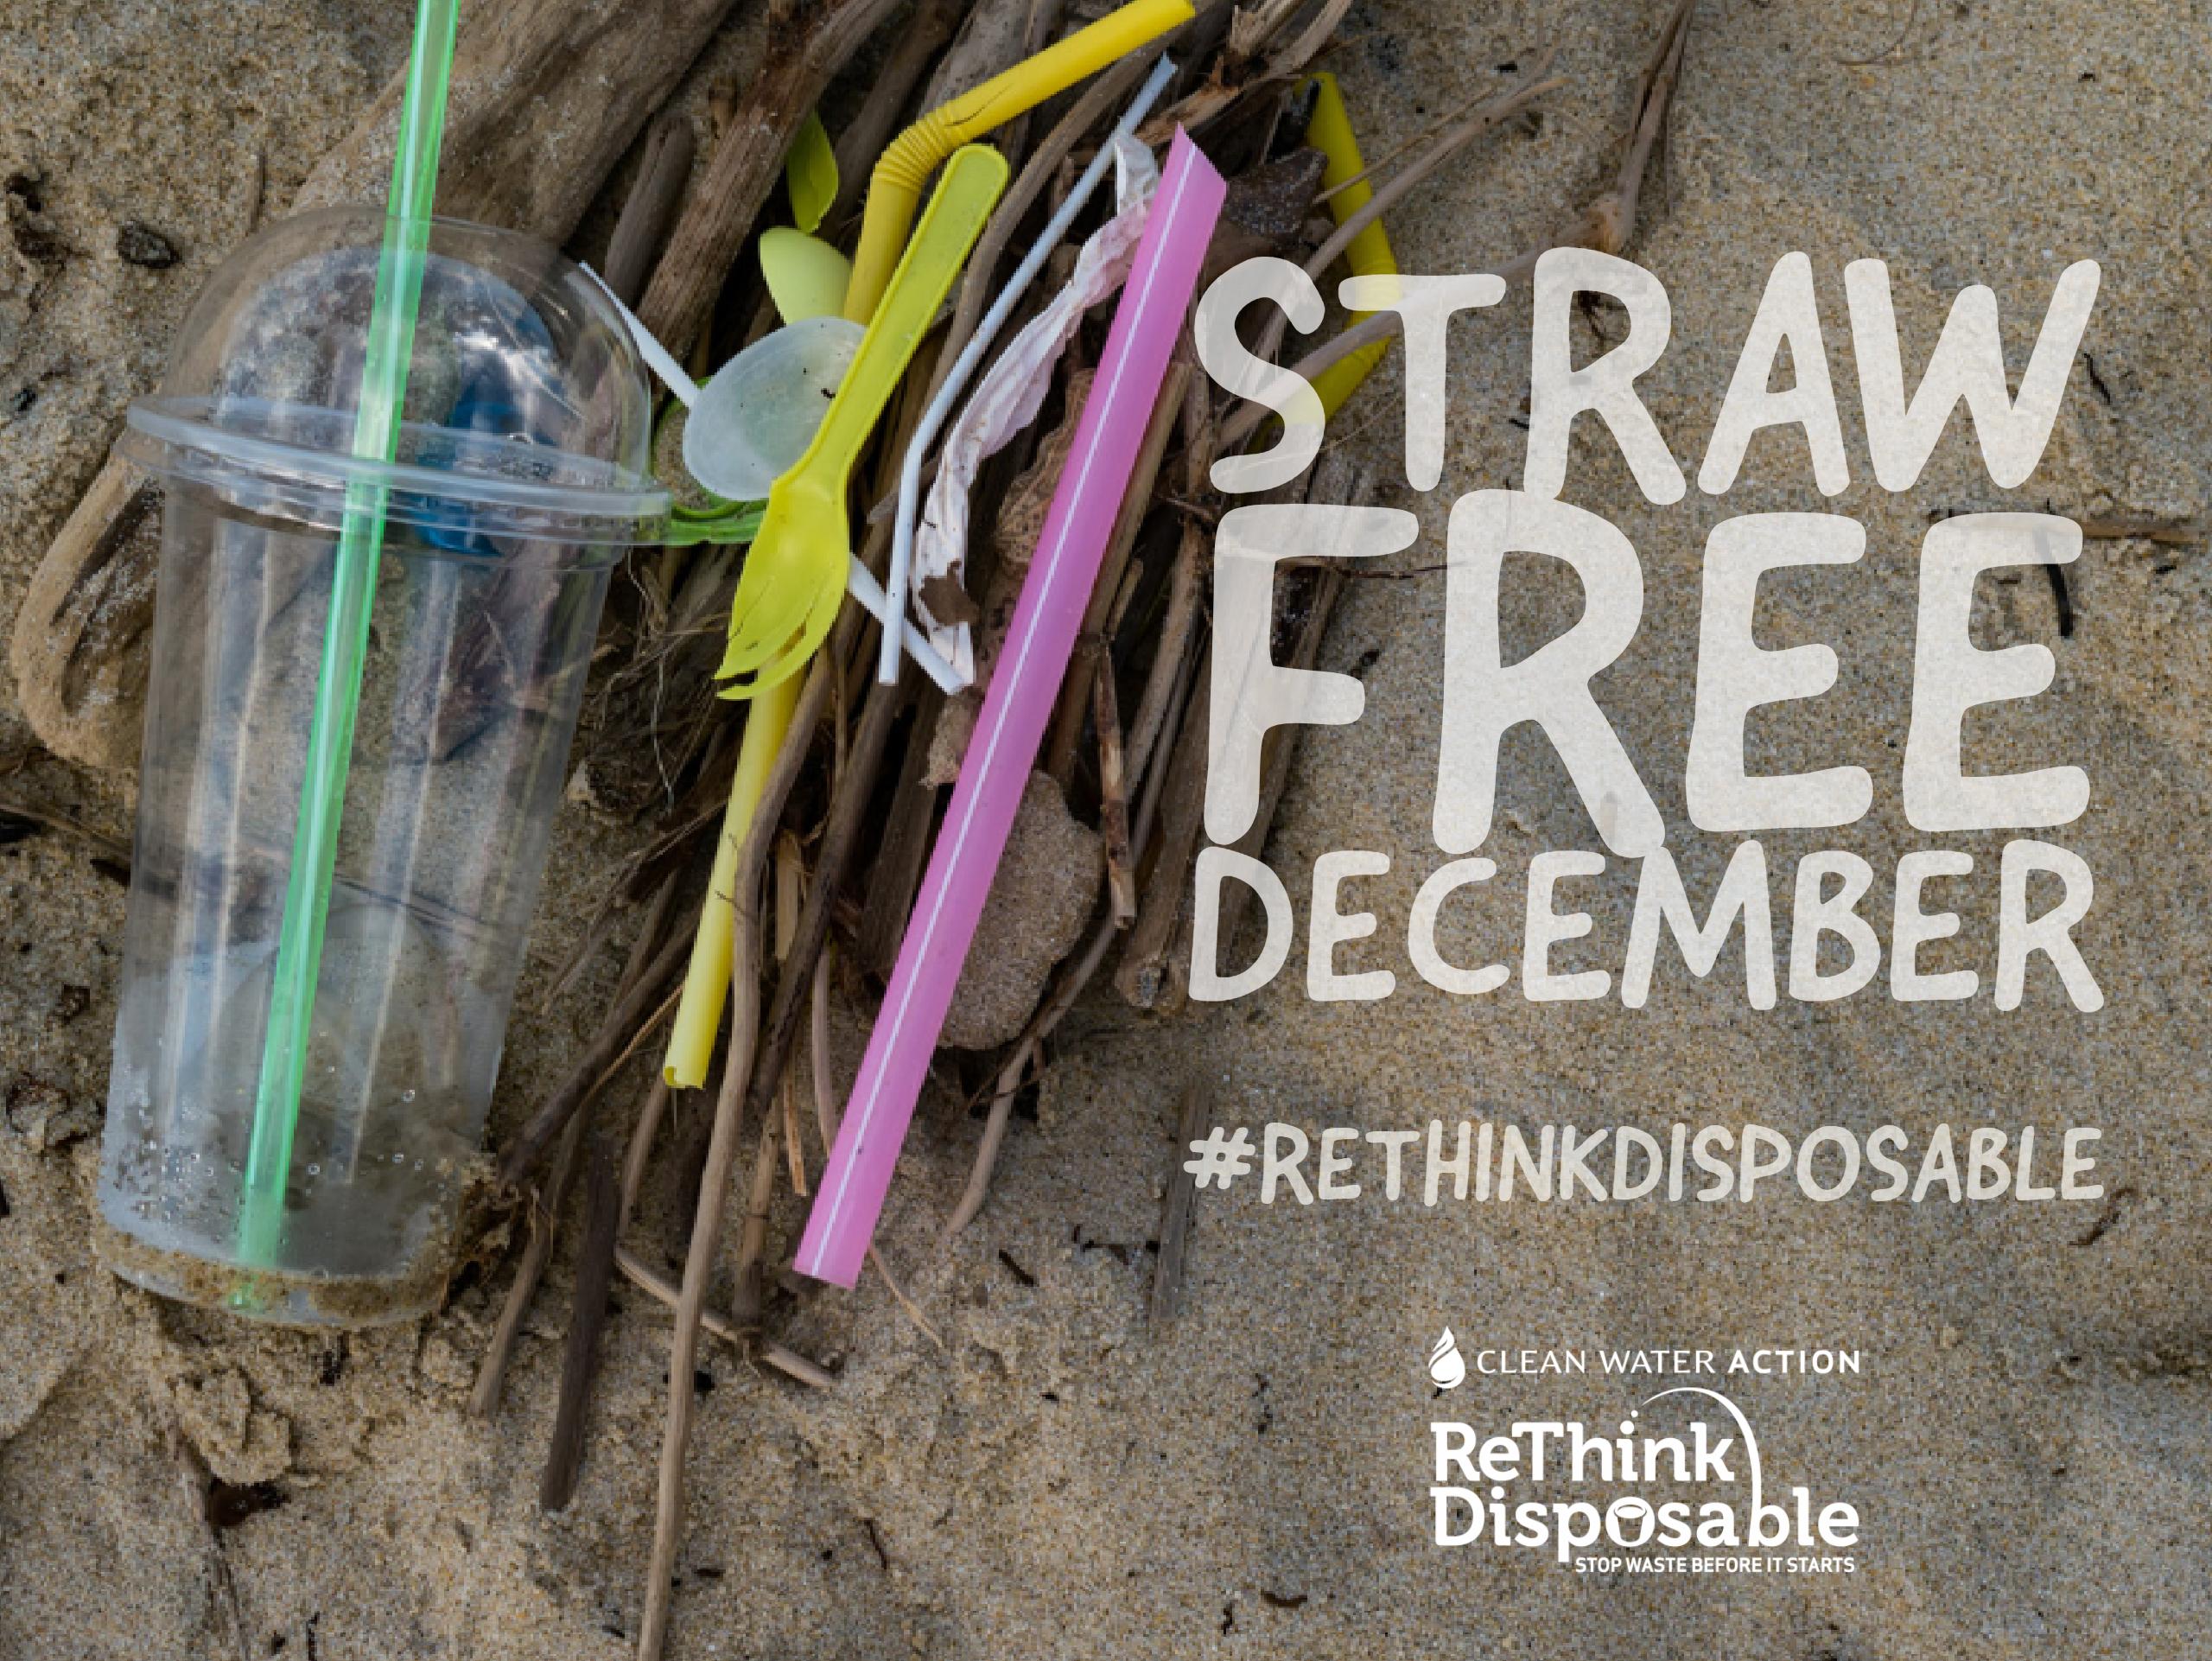 New Jersey_Rethink Disposable_Straw Free December_Clean Water Action